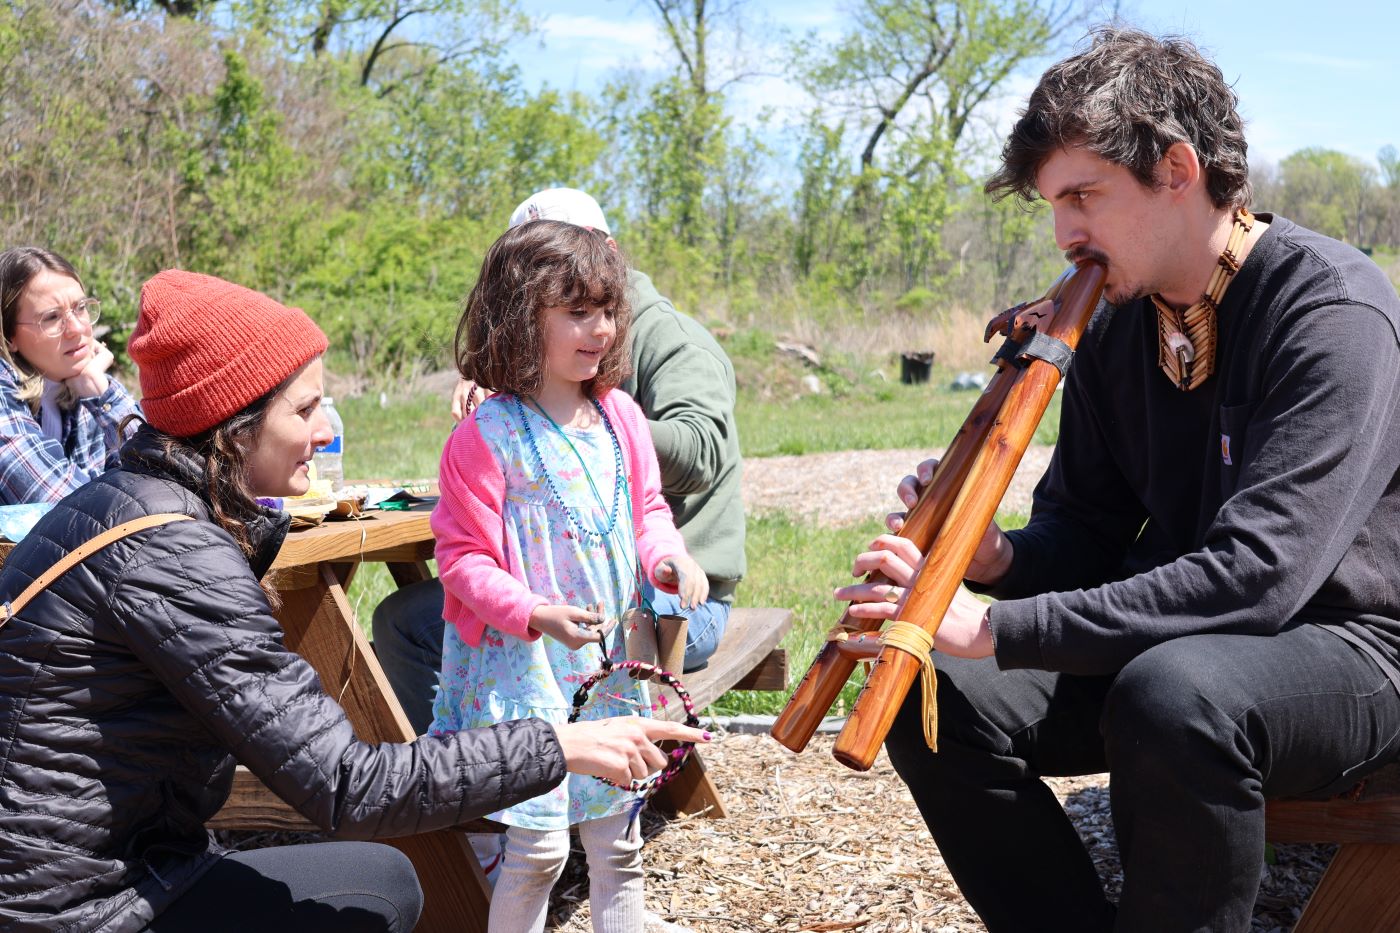 Man blowing into a wooden instrument as a mother and daughter watch